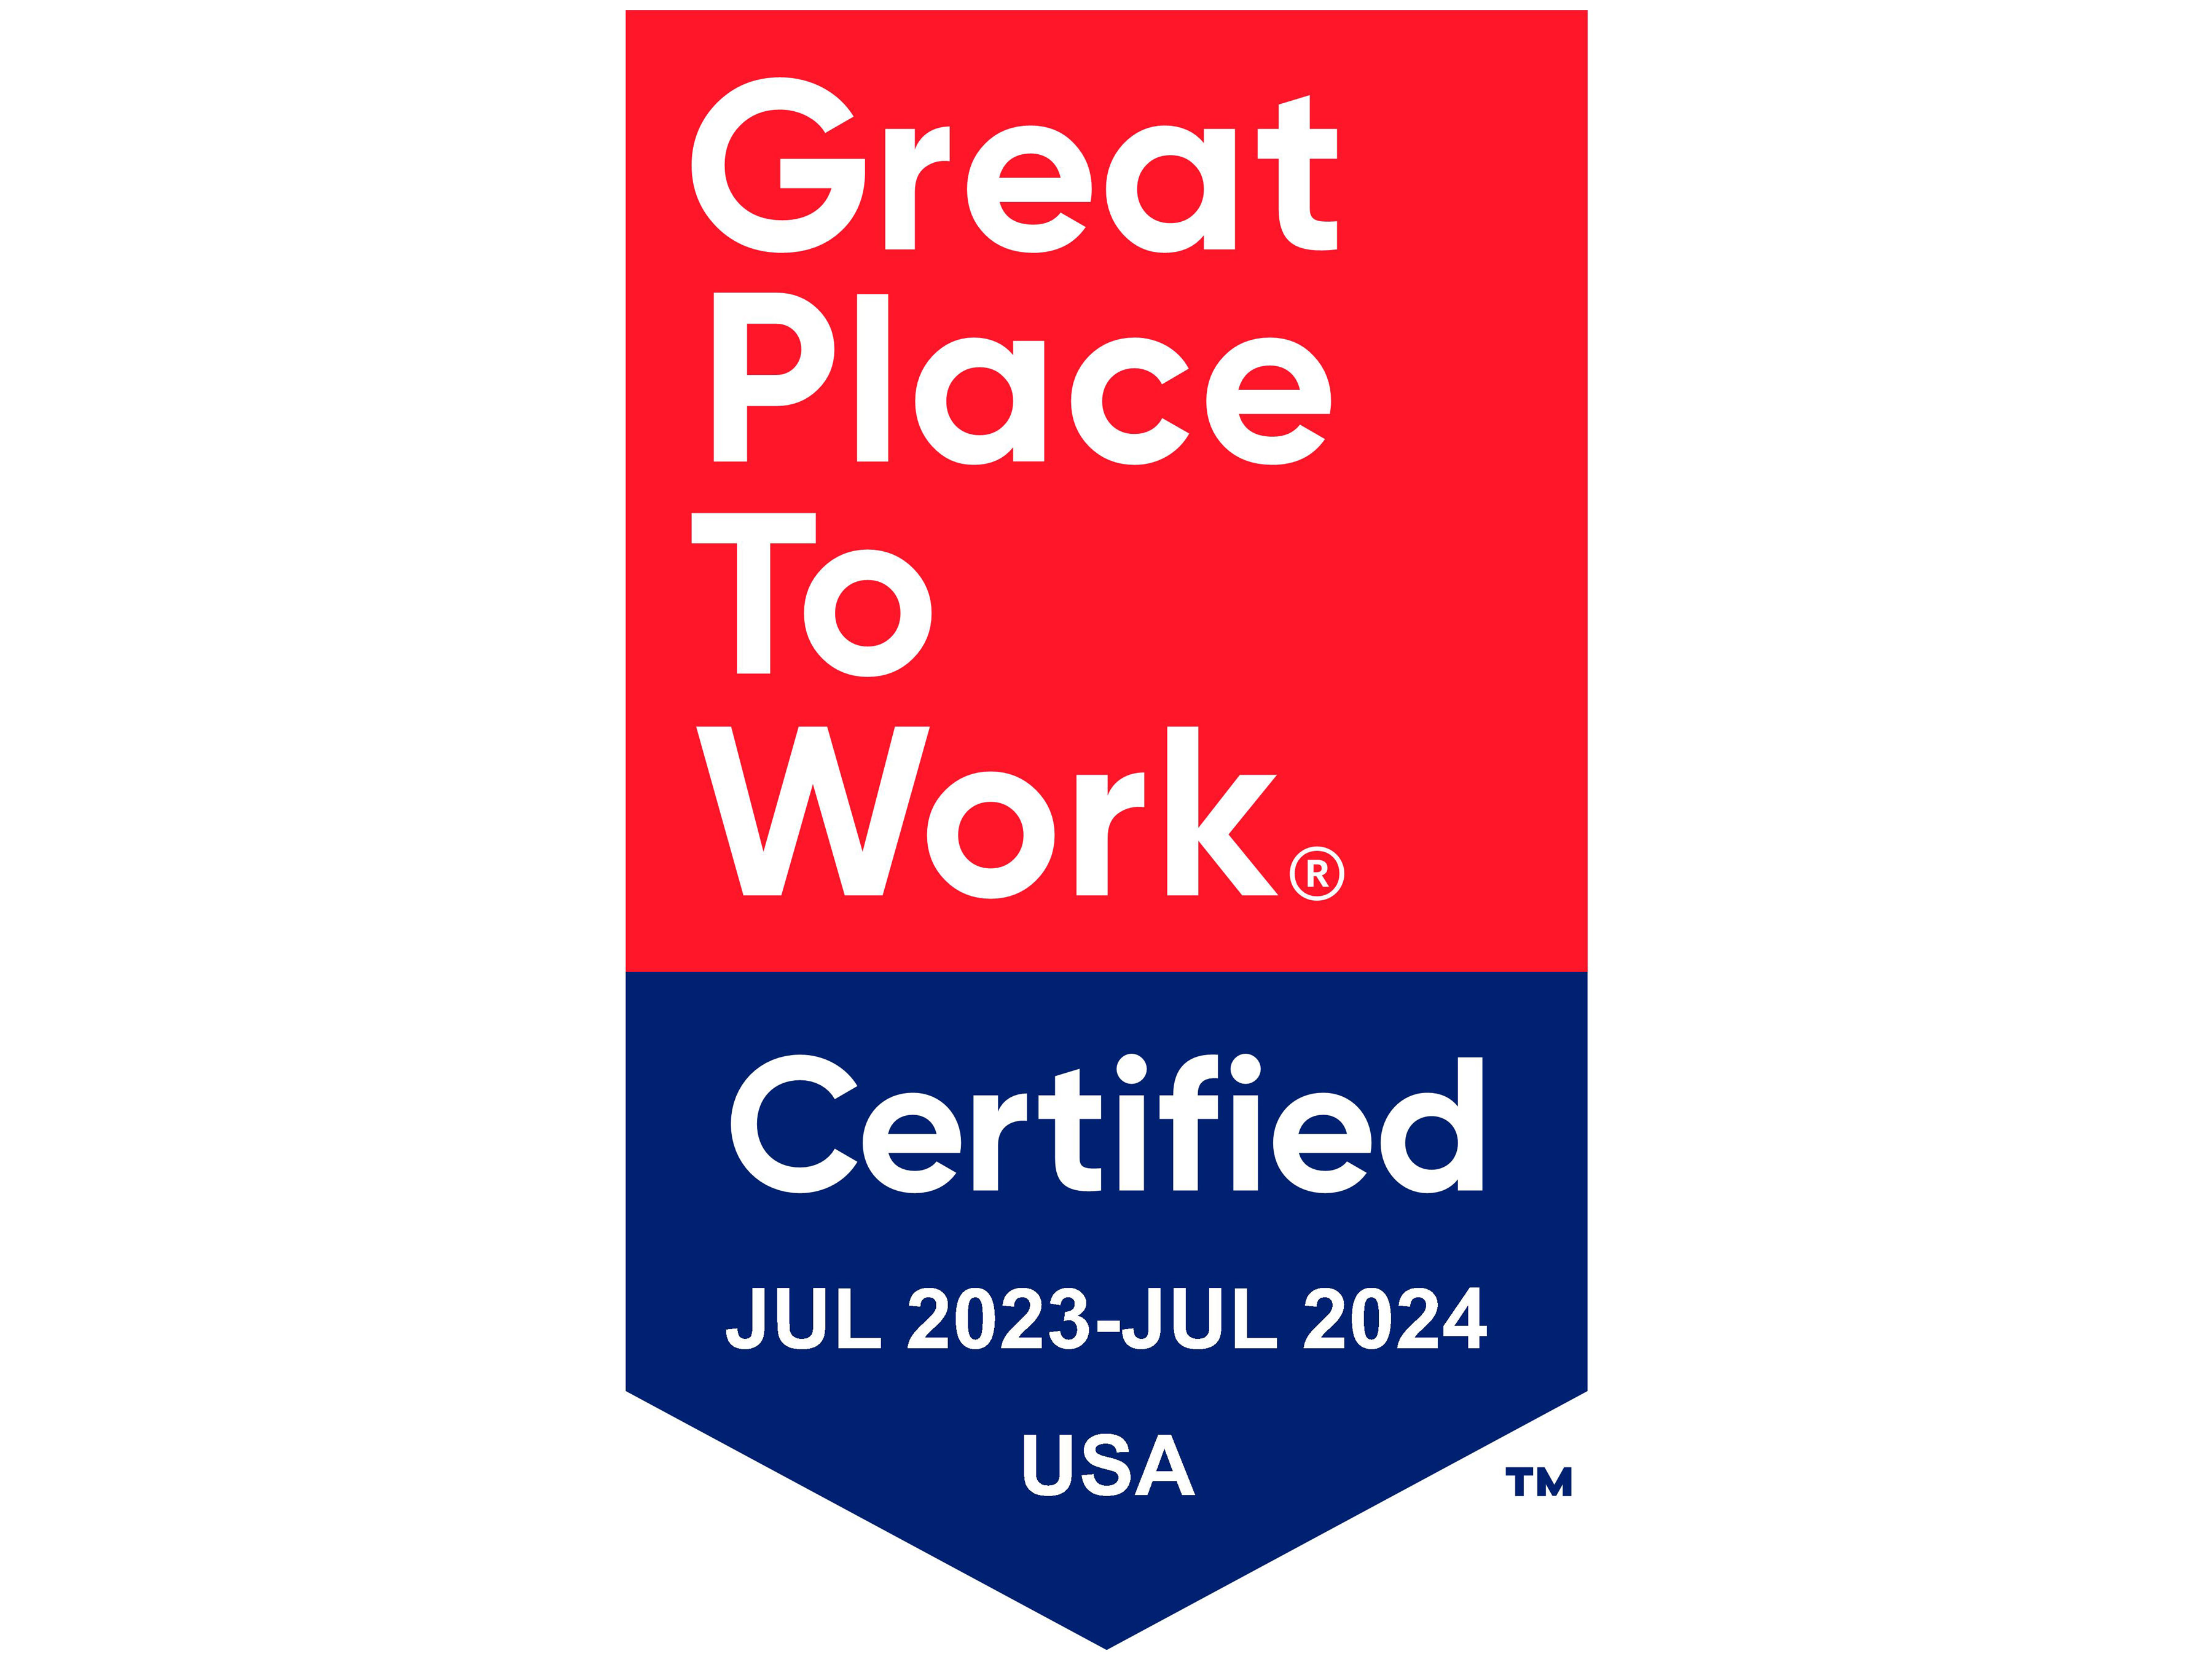 Great Place to Work Certification 2023 logo